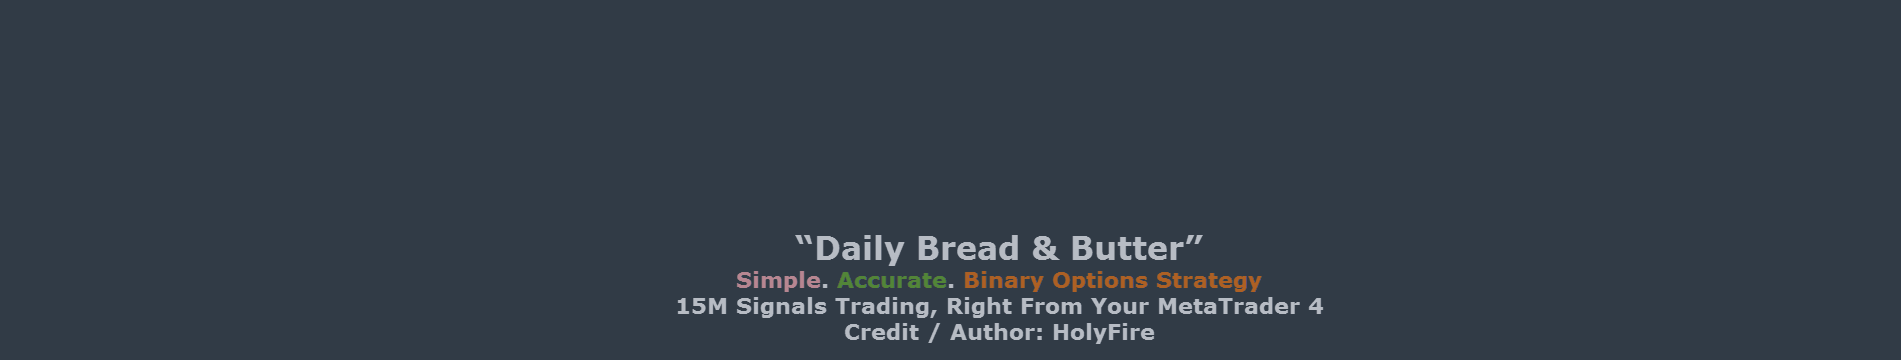 Free Binary Options Trading System for MetaTrader 4: “Daily Bread & Butter”.